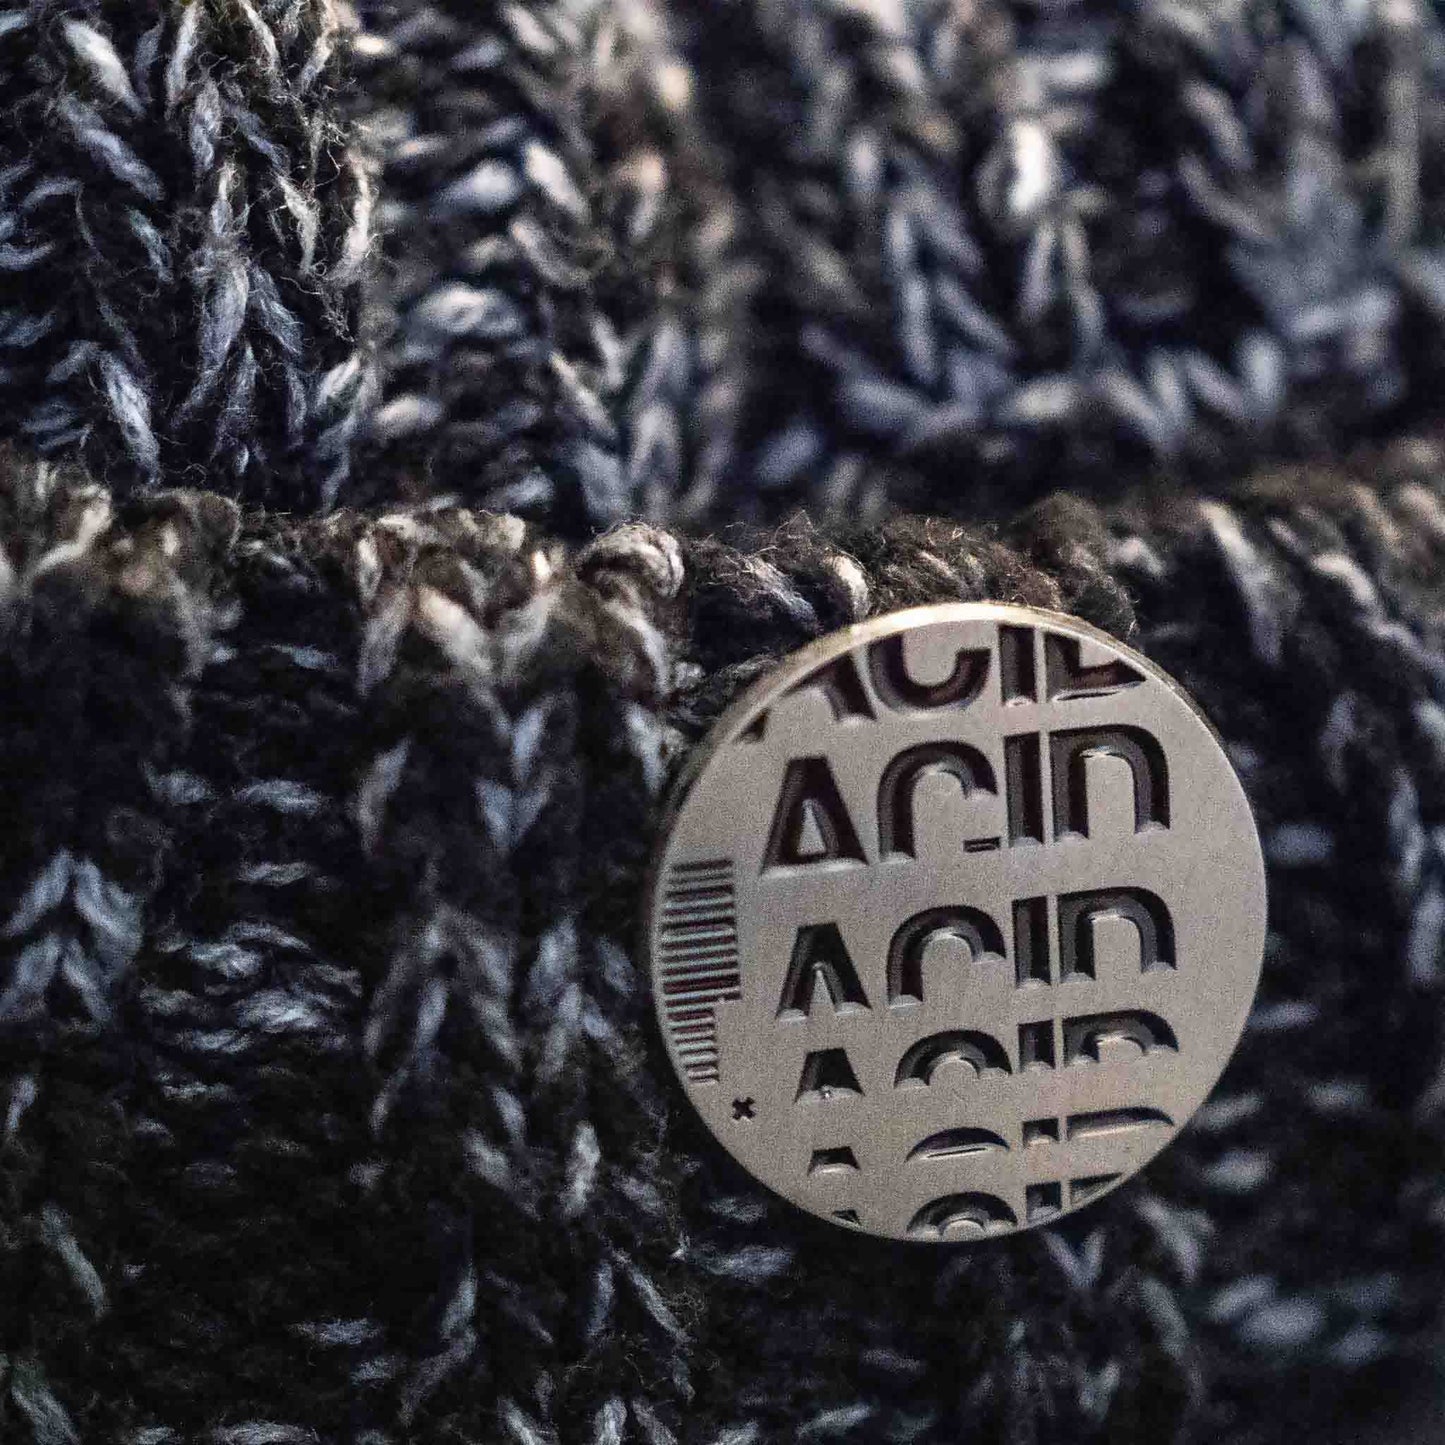 Antique silver with black enamel acid house pin badge on a wooly hat